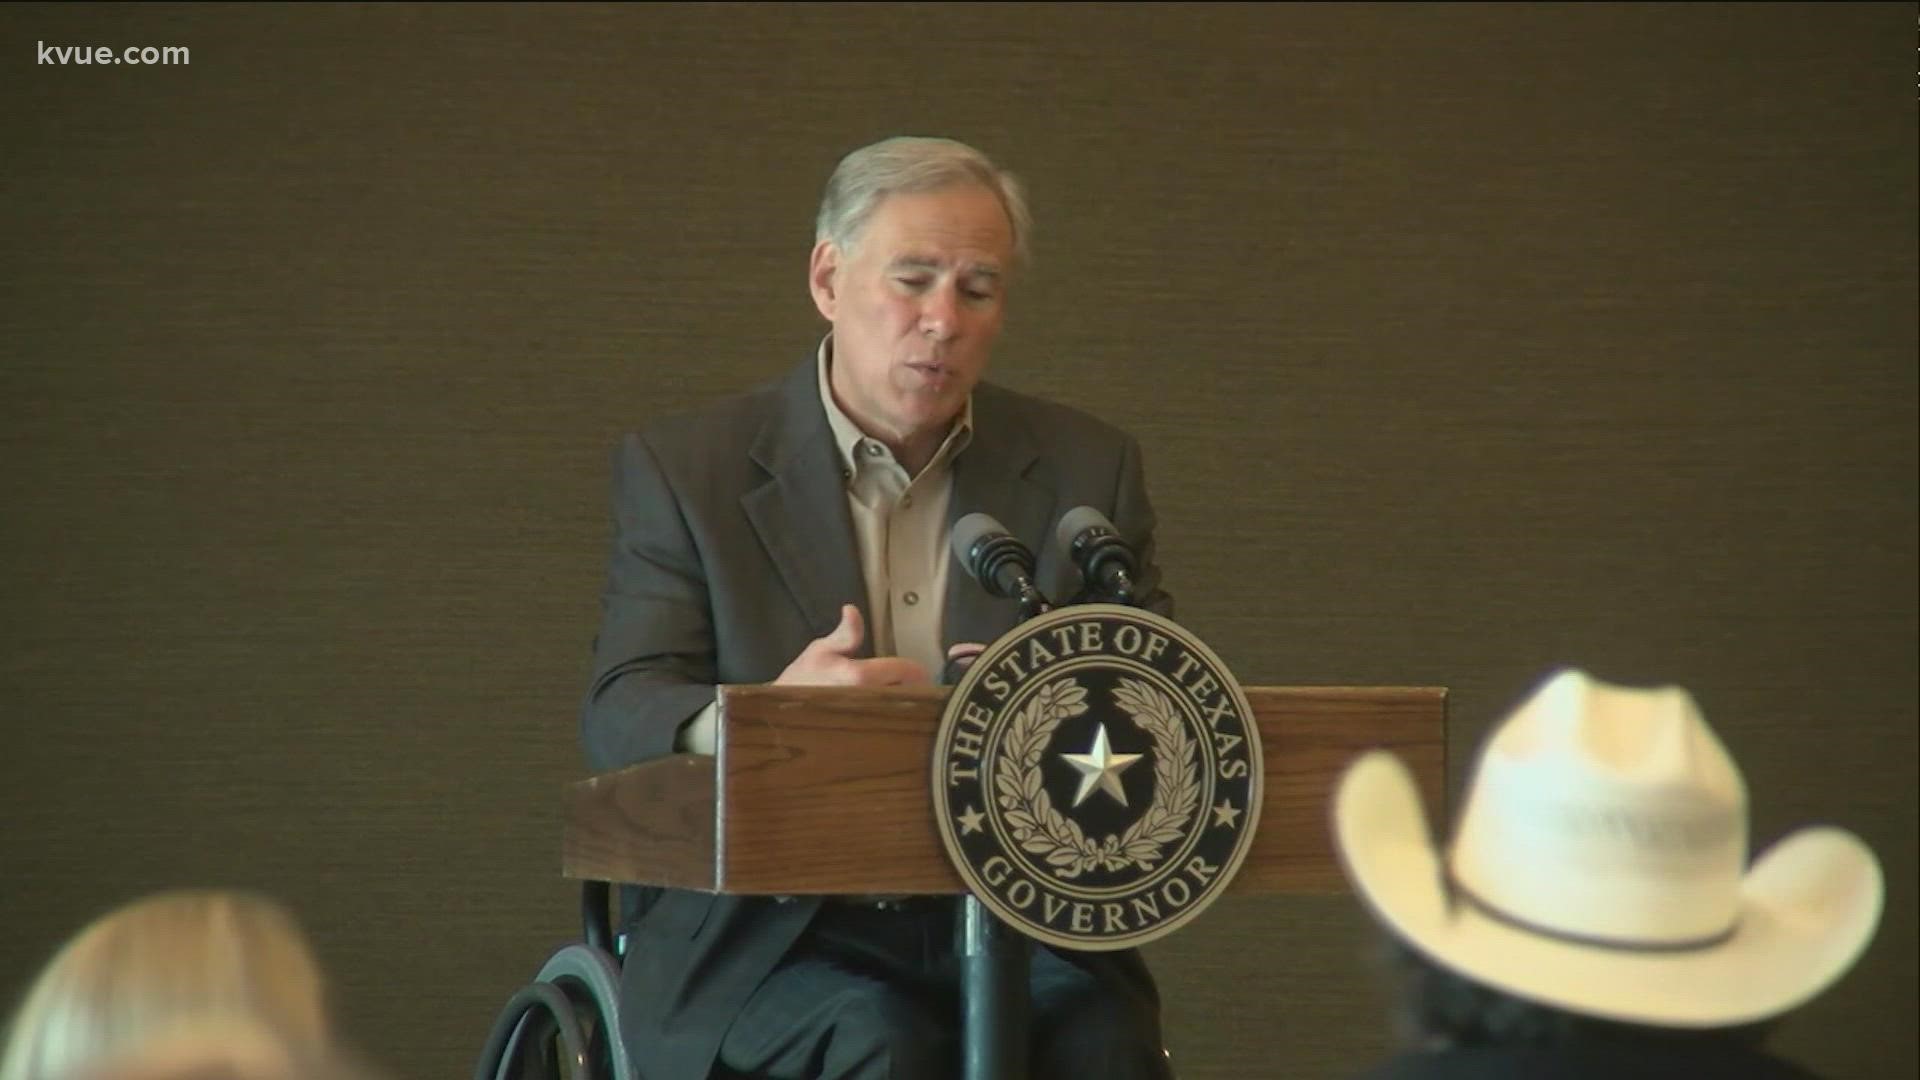 "I thank our law enforcement officers who have answered the call to protect and serve their fellow Texans," Gov. Abbott said at the meeting.